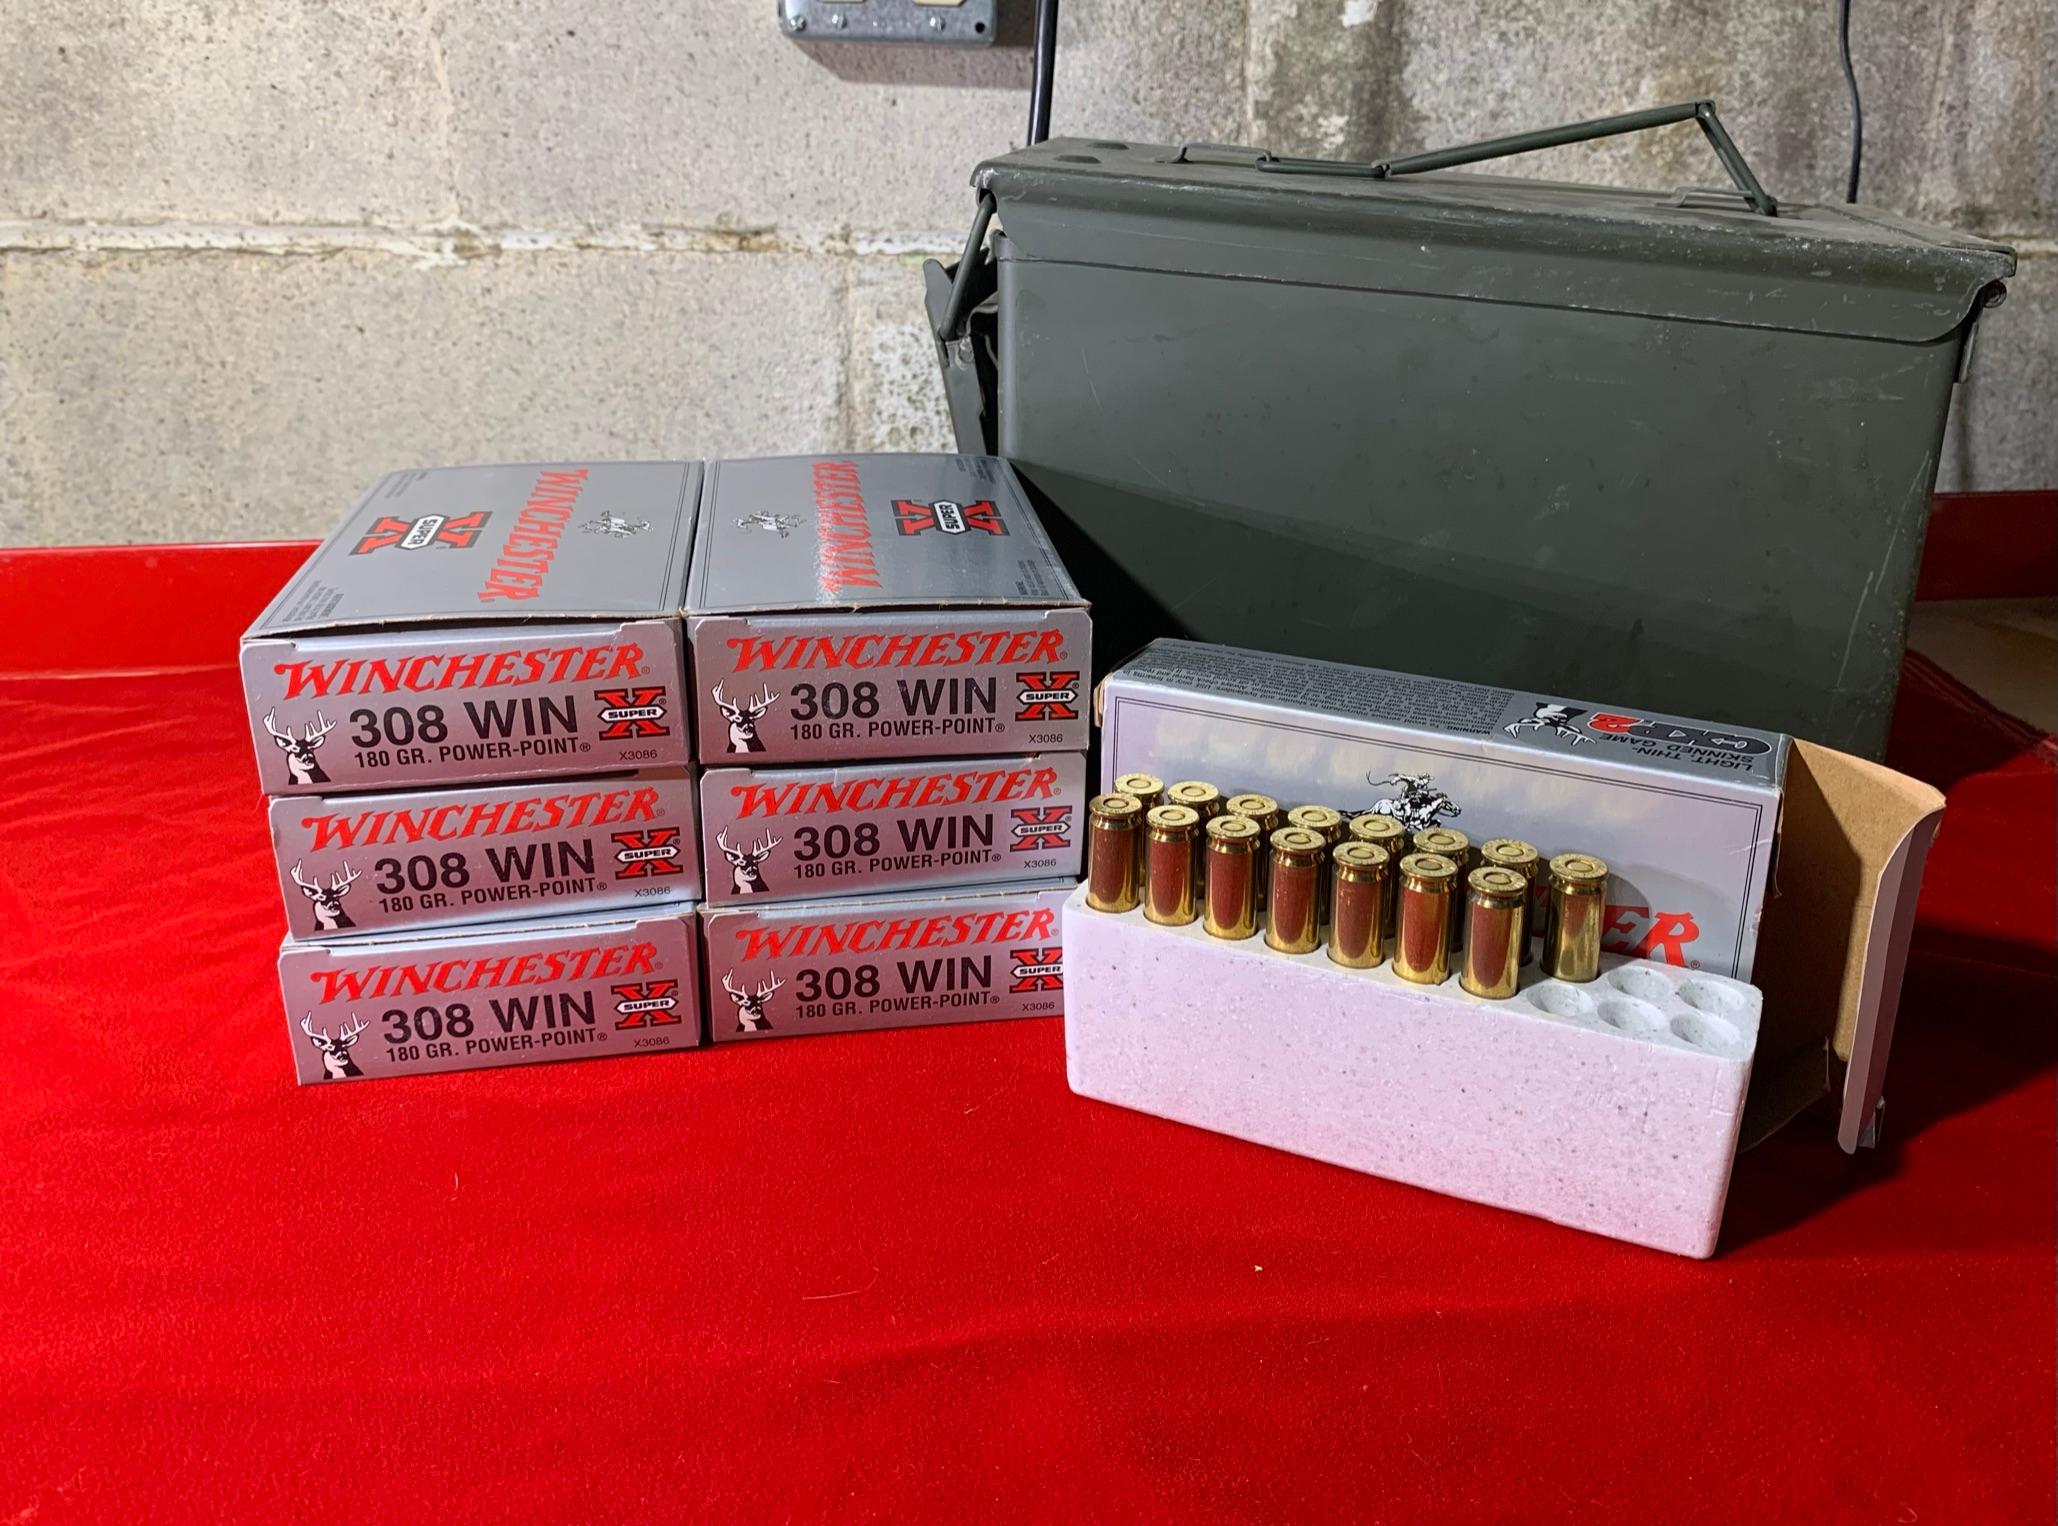 6 Full Boxes of  Winchester 308.  180 Grain Ammunition.  Addition Half Box of  308 Ammunition and Am